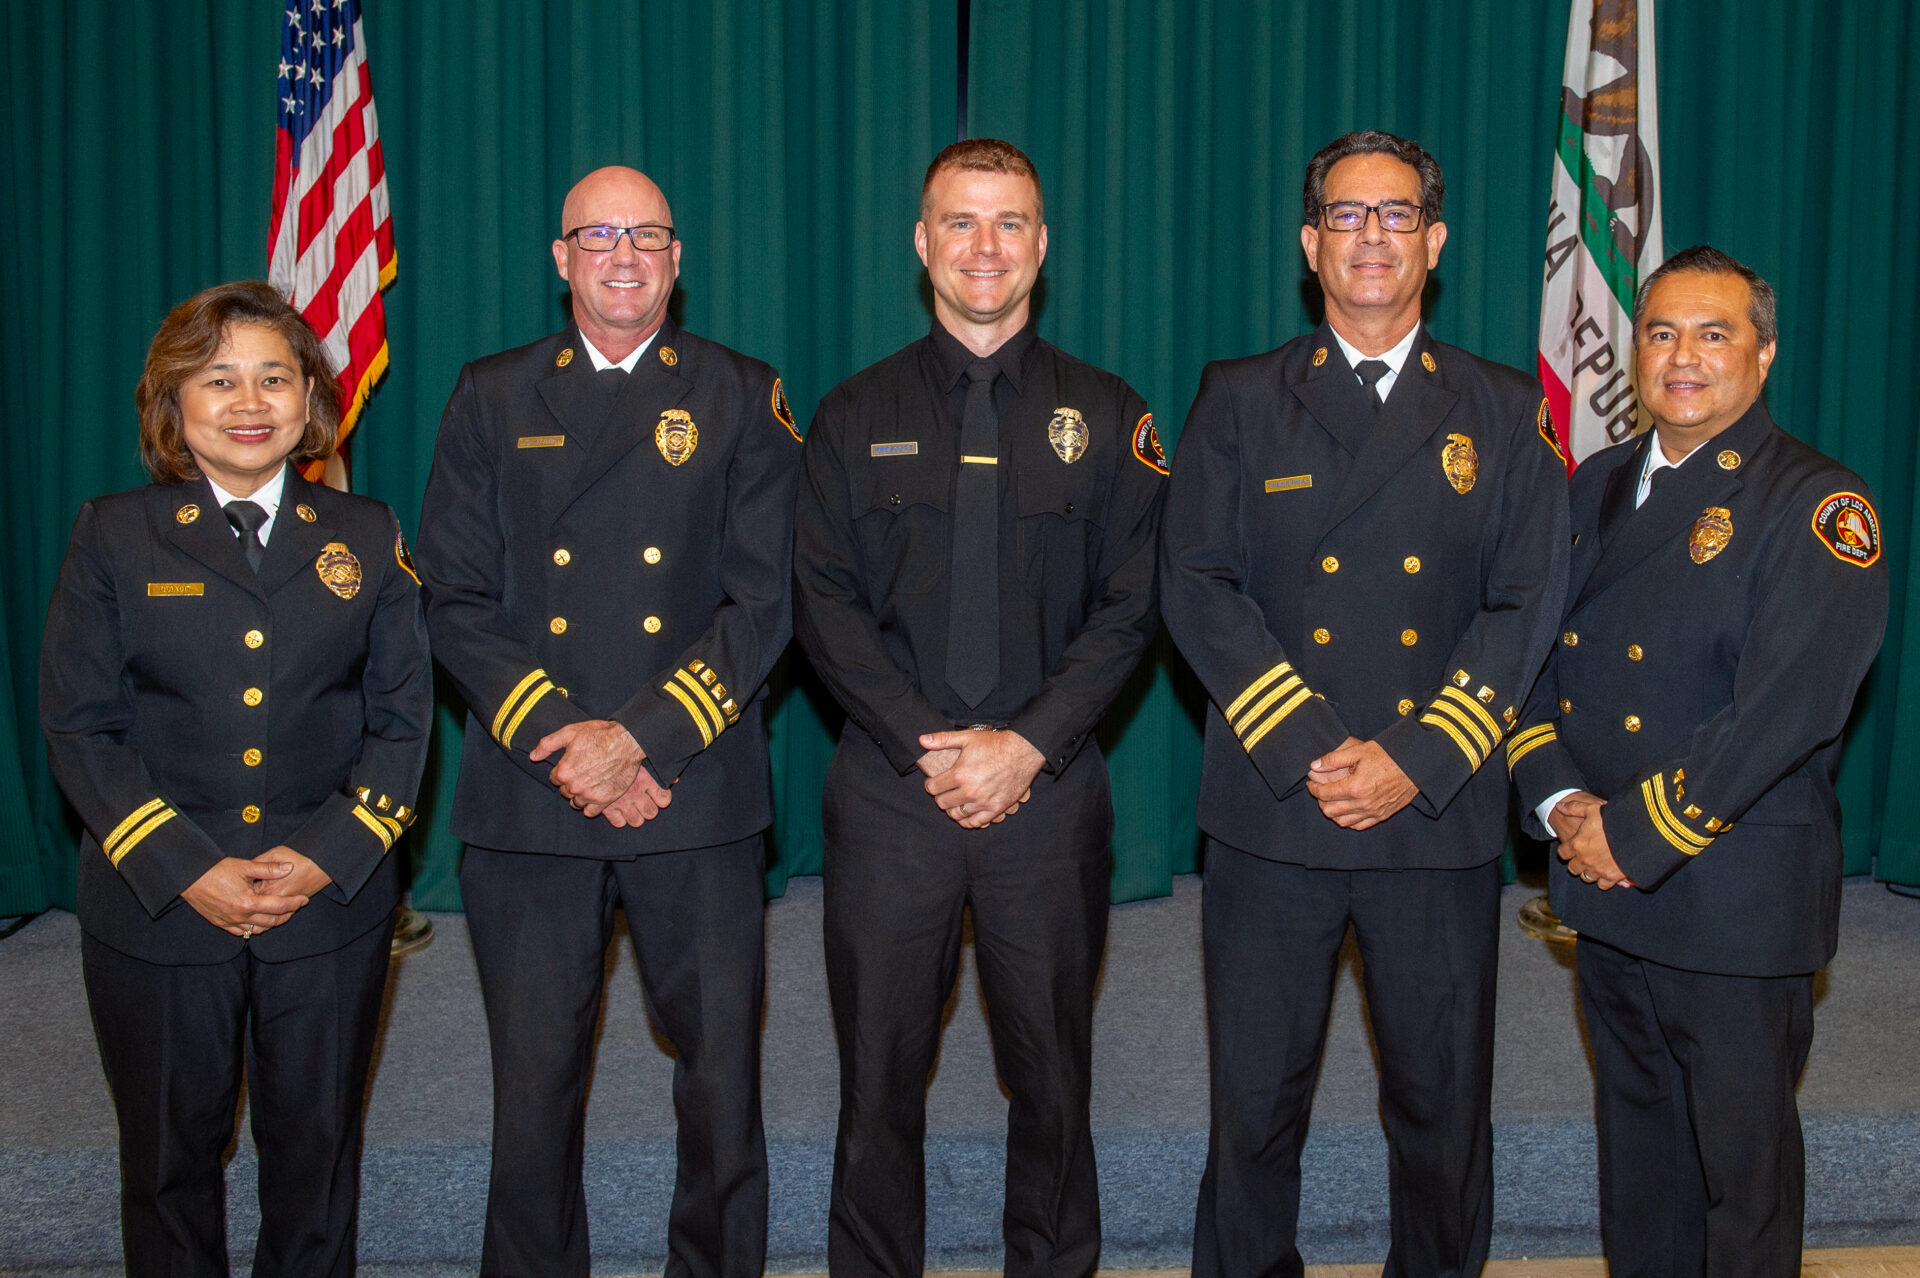 The County of Los Angeles Fire Department’s (LACoFD) Health Hazardous Materials Division (HHMD) graduated a class of three hazardous materials specialists from the HHMD training academy.